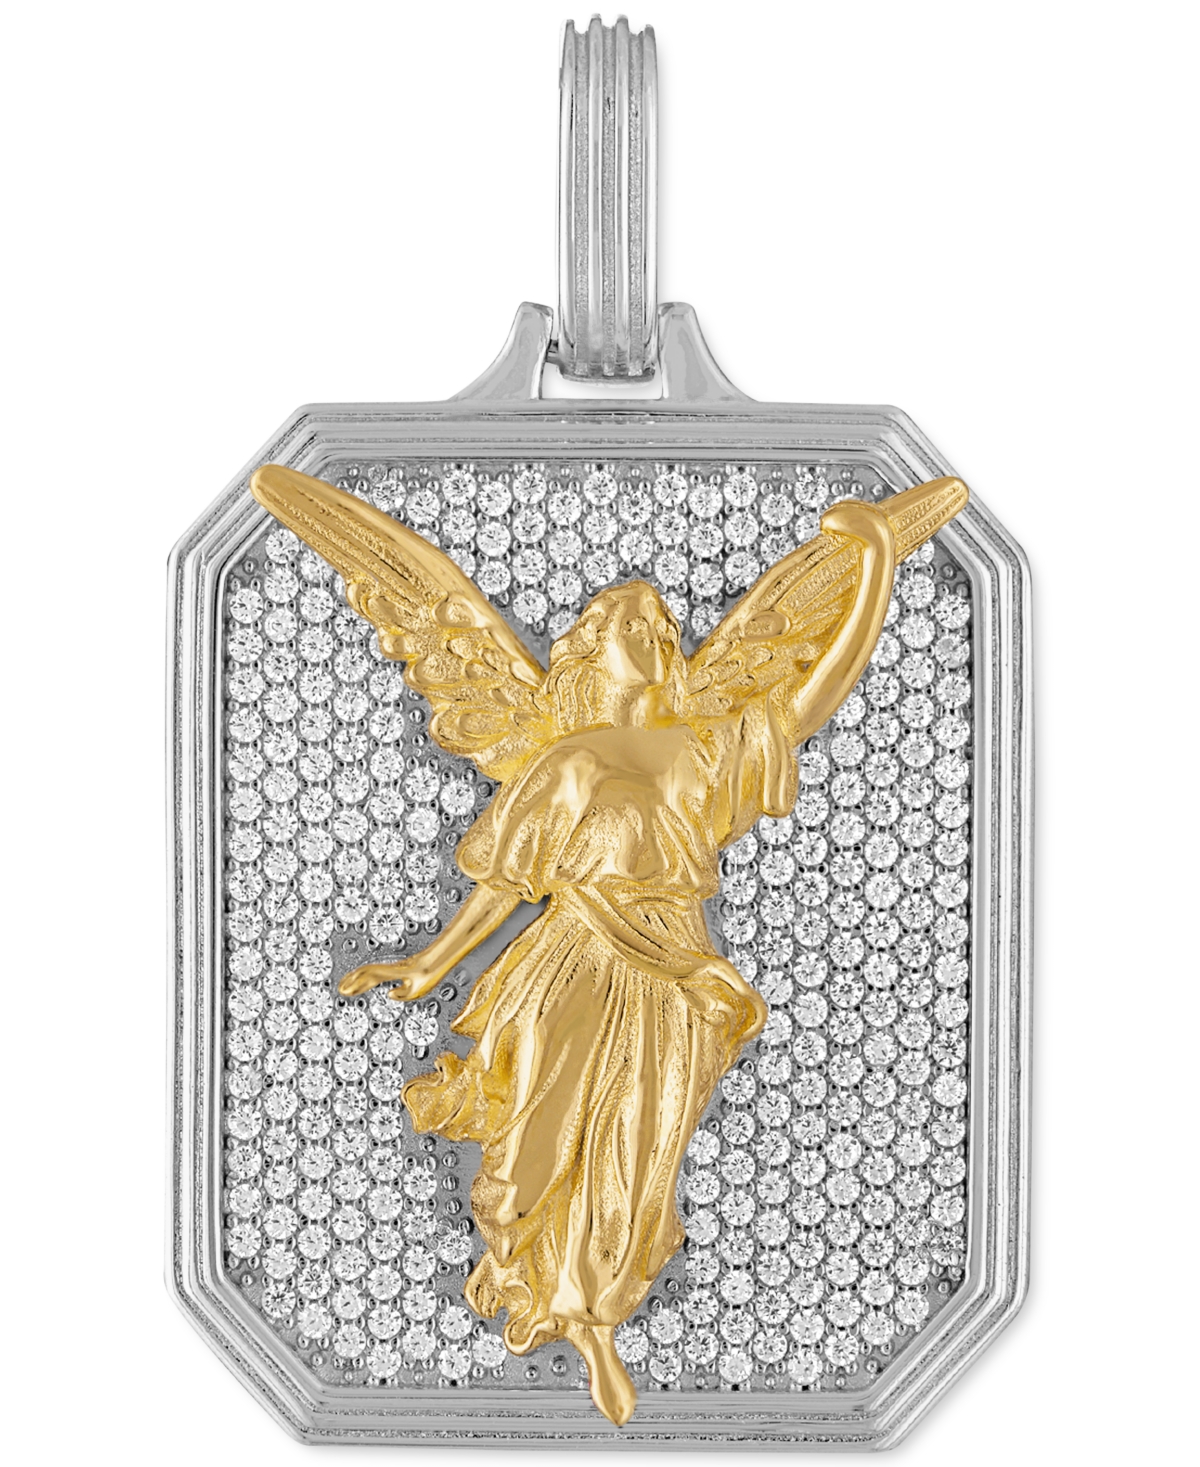 Esquire Men's Jewelry Cubic Zirconia Angel Amulet Pendant In Sterling Silver And 14k Gold-plated Silver, Created For Macy'